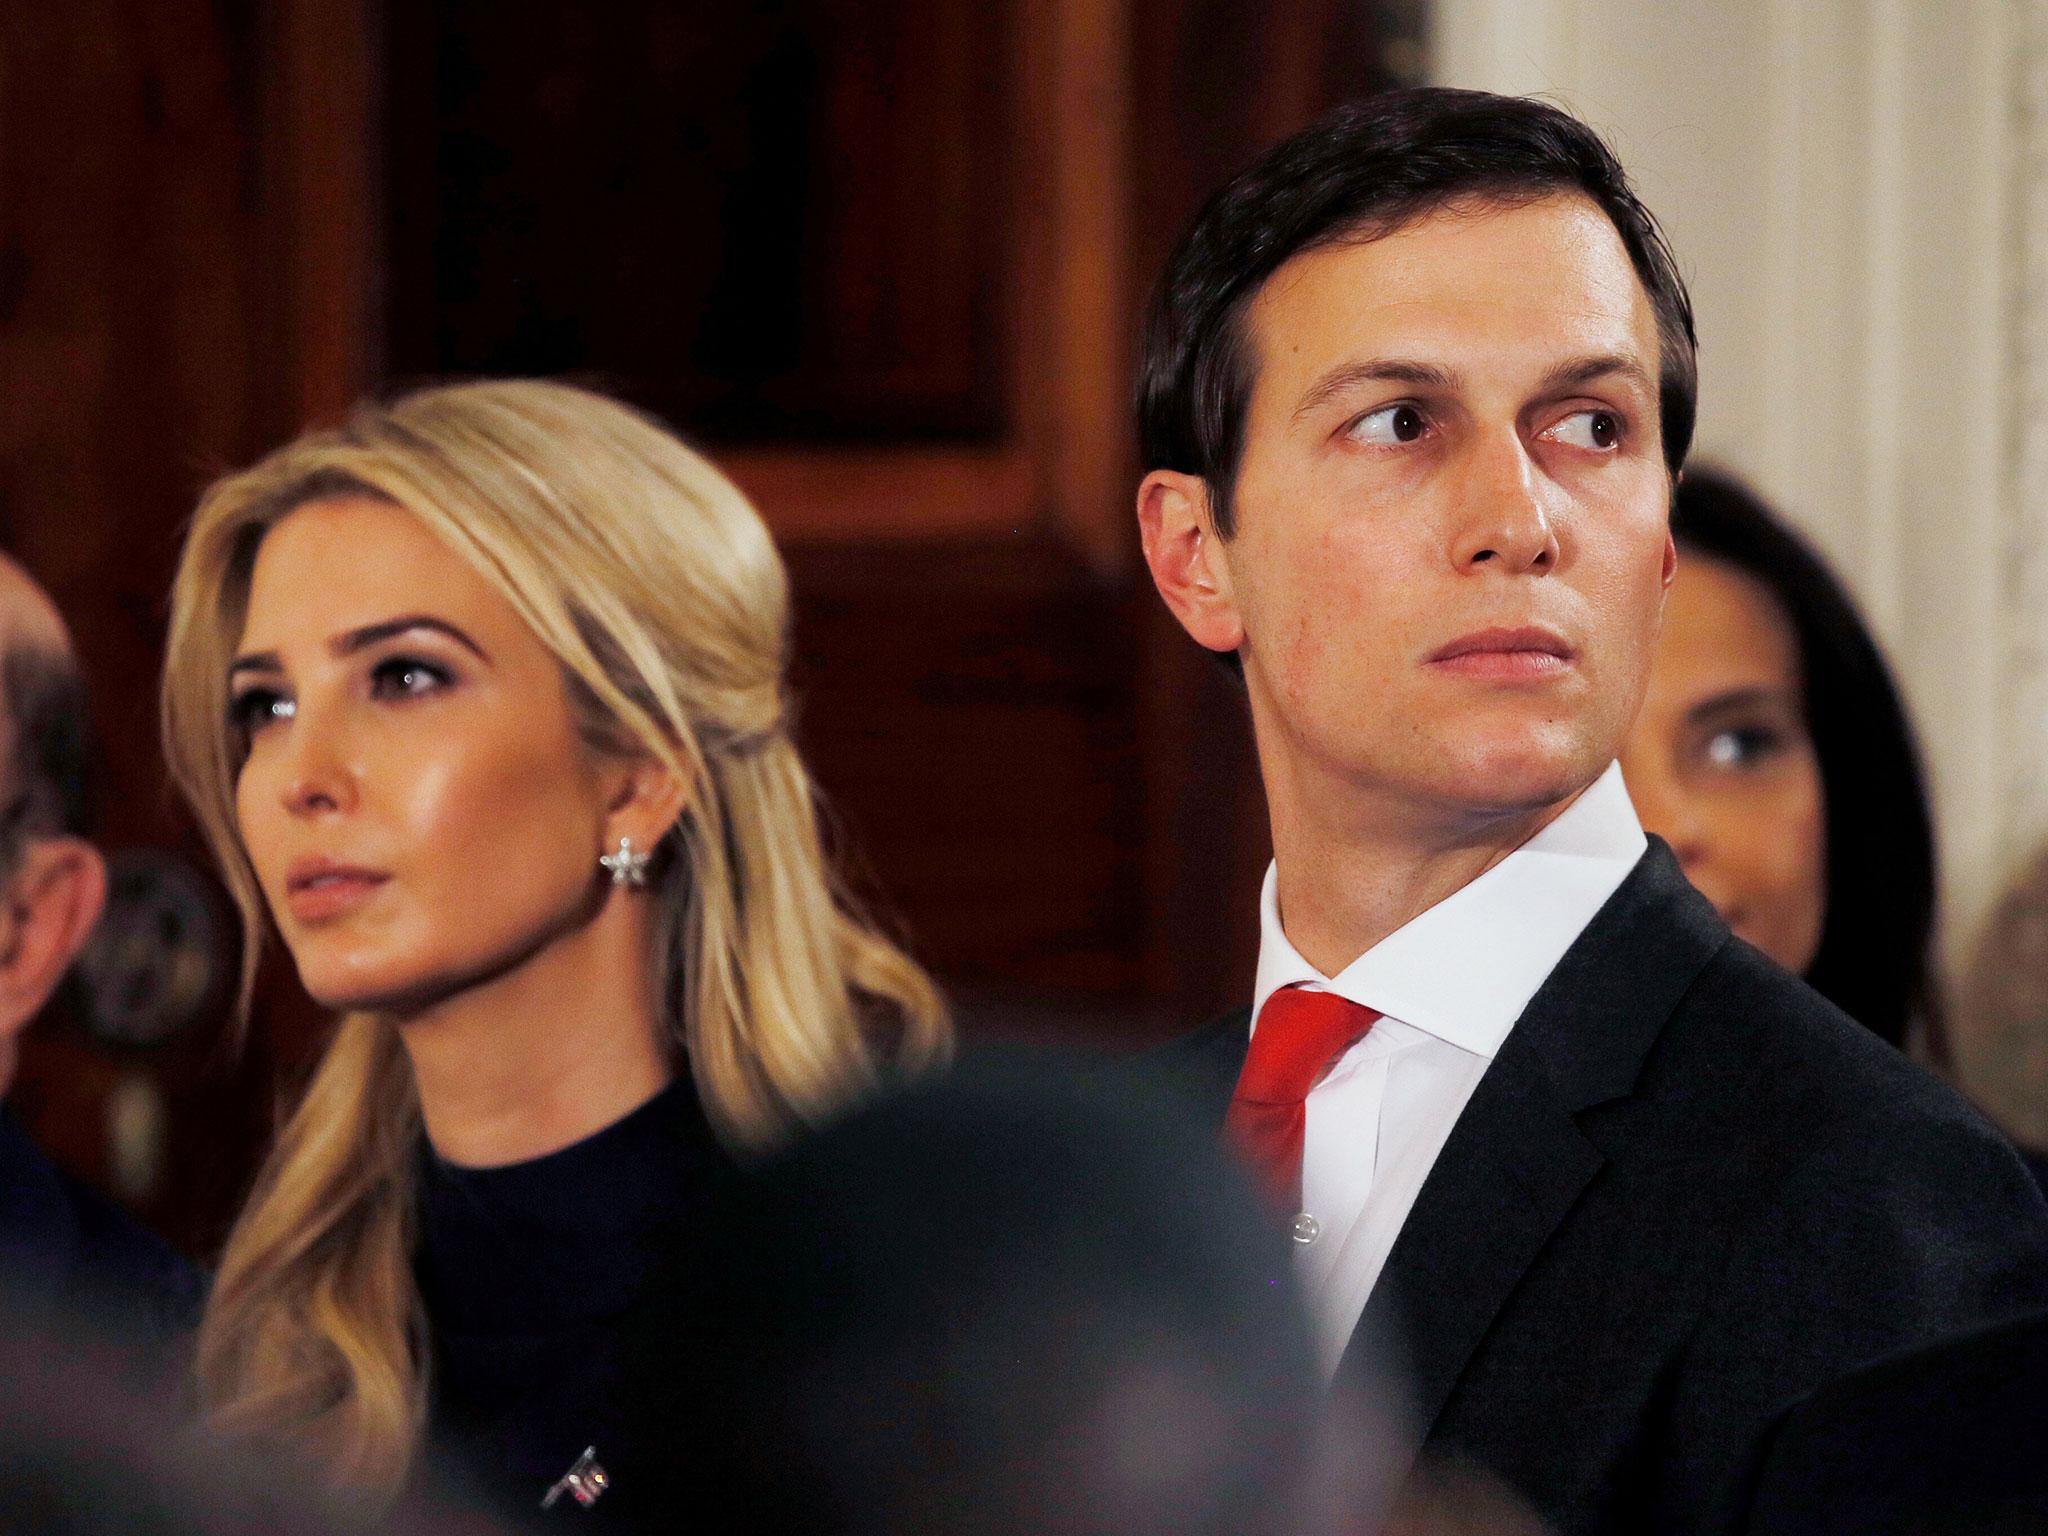 Far-right site has softened their attacks on Jared Kushner with no stories about him on their homepage